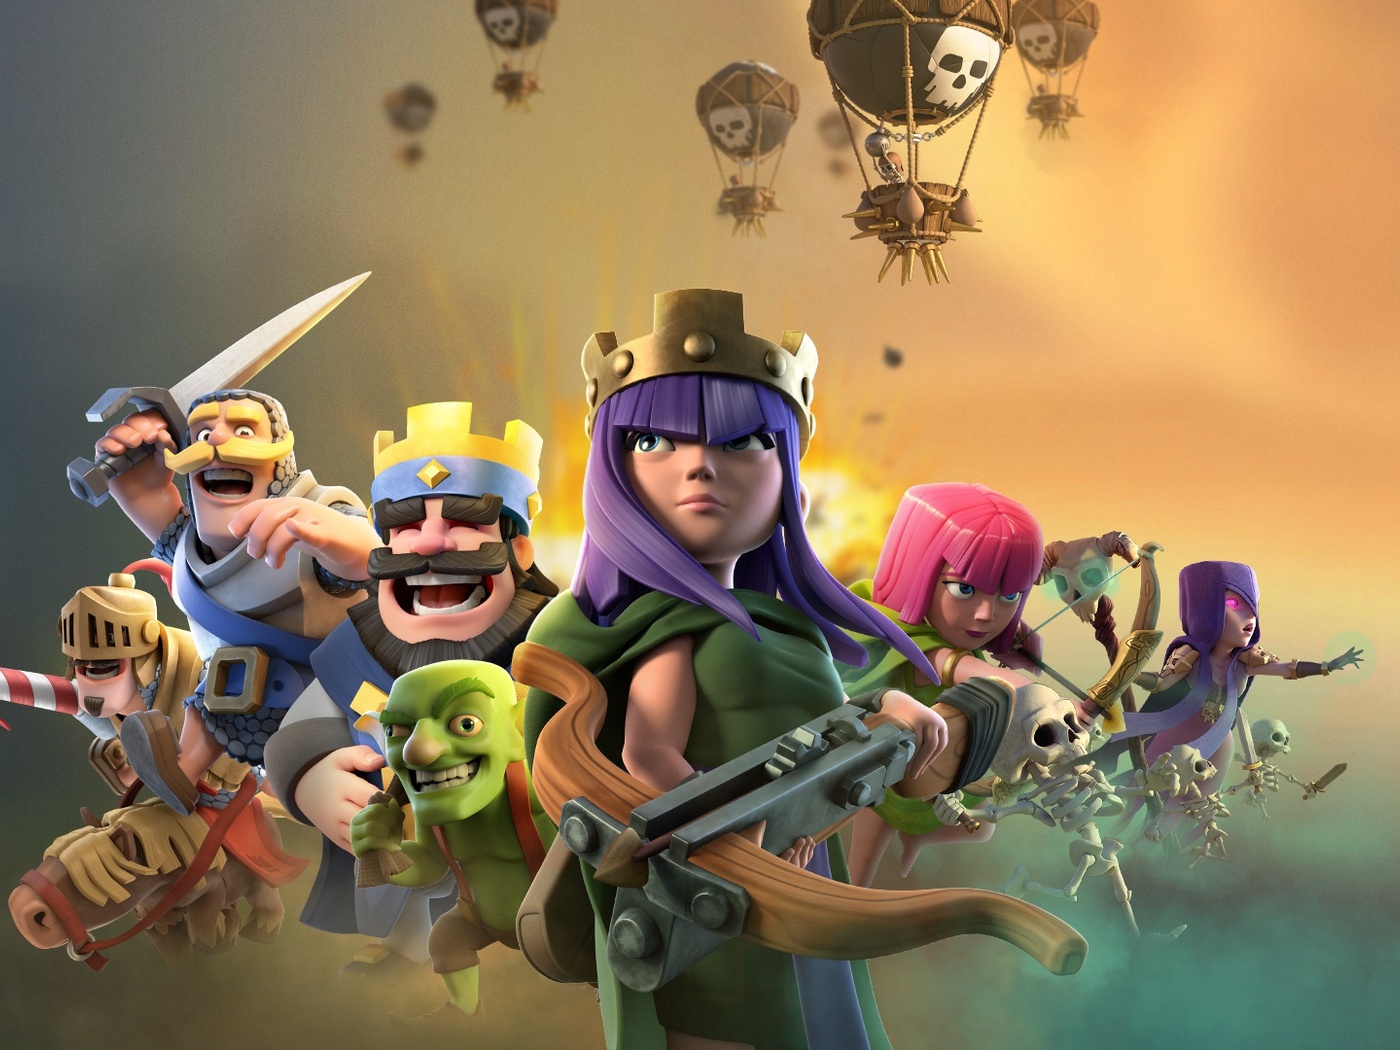 clash-of-clans-wallpapers. clash-royale-wallpapers. games-wallpapers. hd-wa...